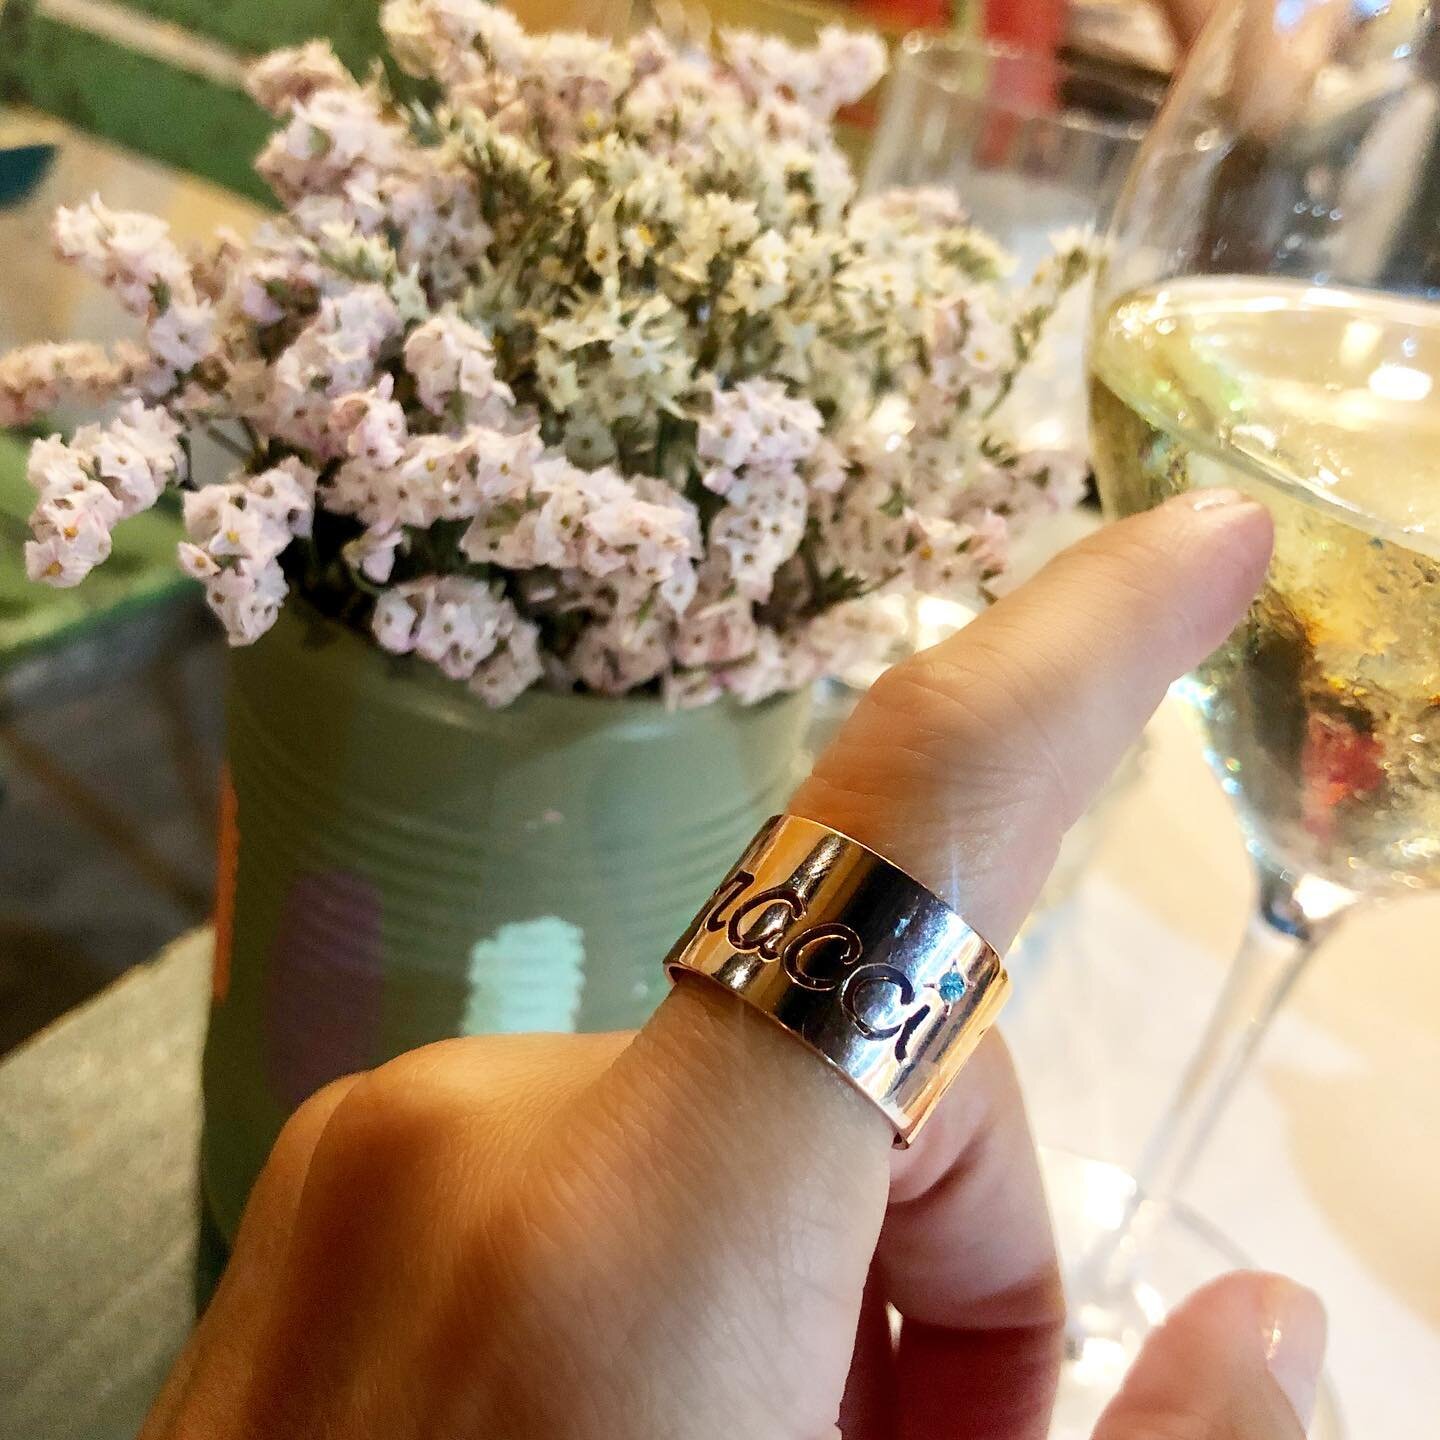 Hugs, from Italy ! #abbracci #cigarband in #rosegold #sljewelry
.
.
.
.
#hugs #personalized #ring #custommade #handmade #finejewelry #finejewellery #bluezircon #jotd #rotd #luxe #luxurylifestyle #personalizedring #rome #roma #italia #italy #travel #h